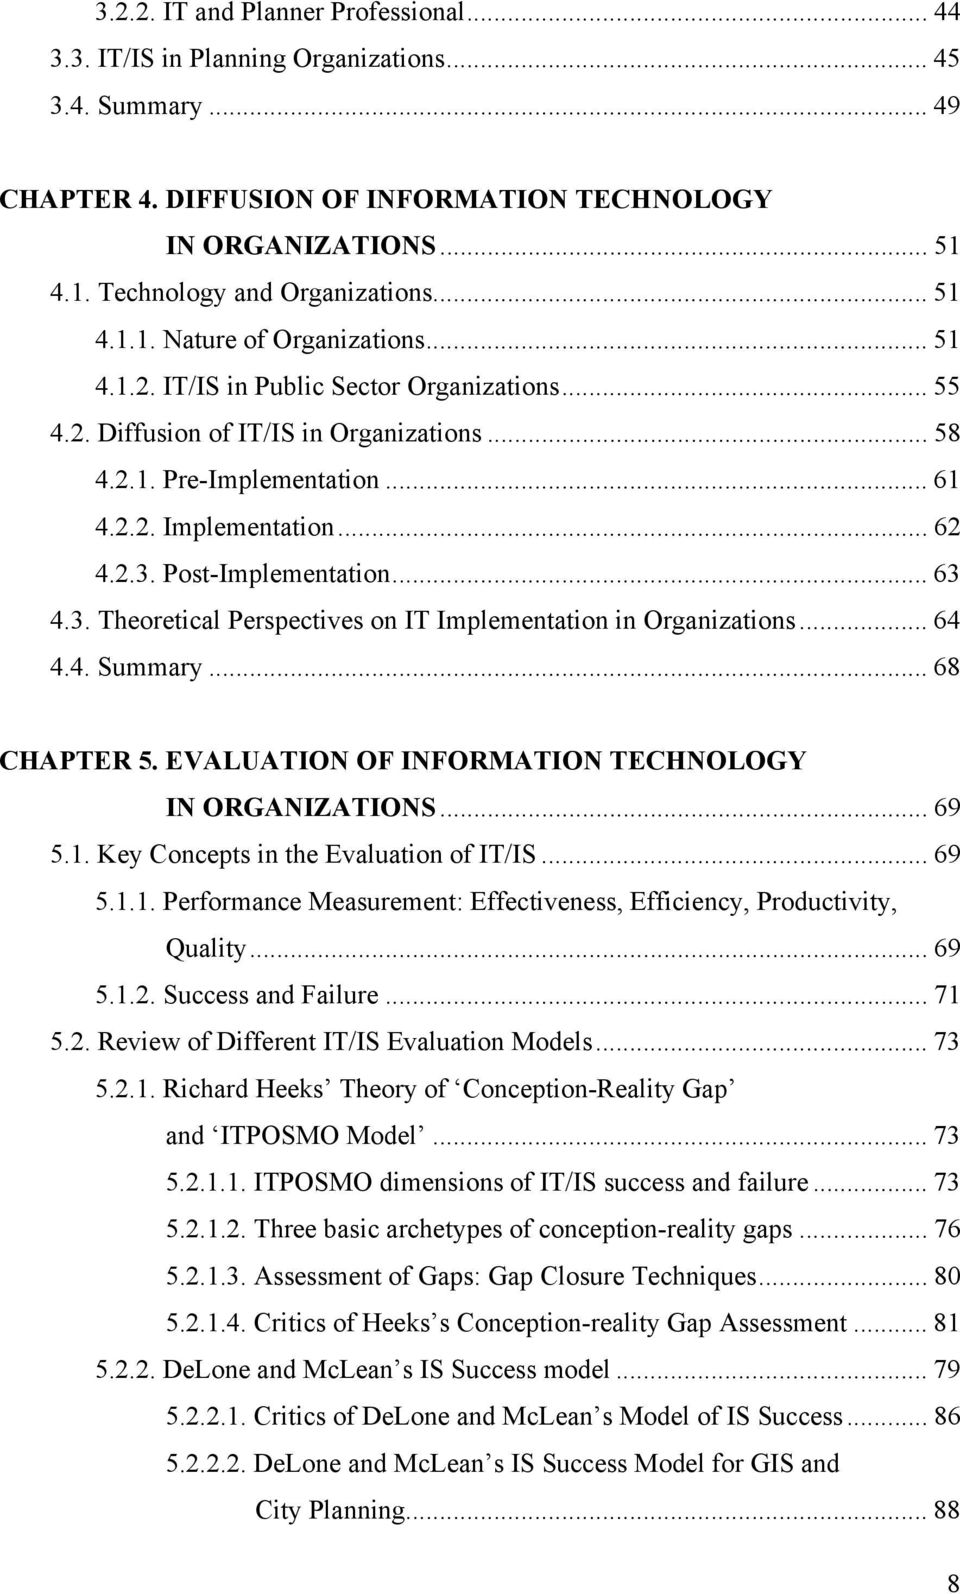 .. 61 4.2.2. Implementation... 62 4.2.3. Post-Implementation... 63 4.3. Theoretical Perspectives on IT Implementation in Organizations... 64 4.4. Summary... 68 CHAPTER 5.